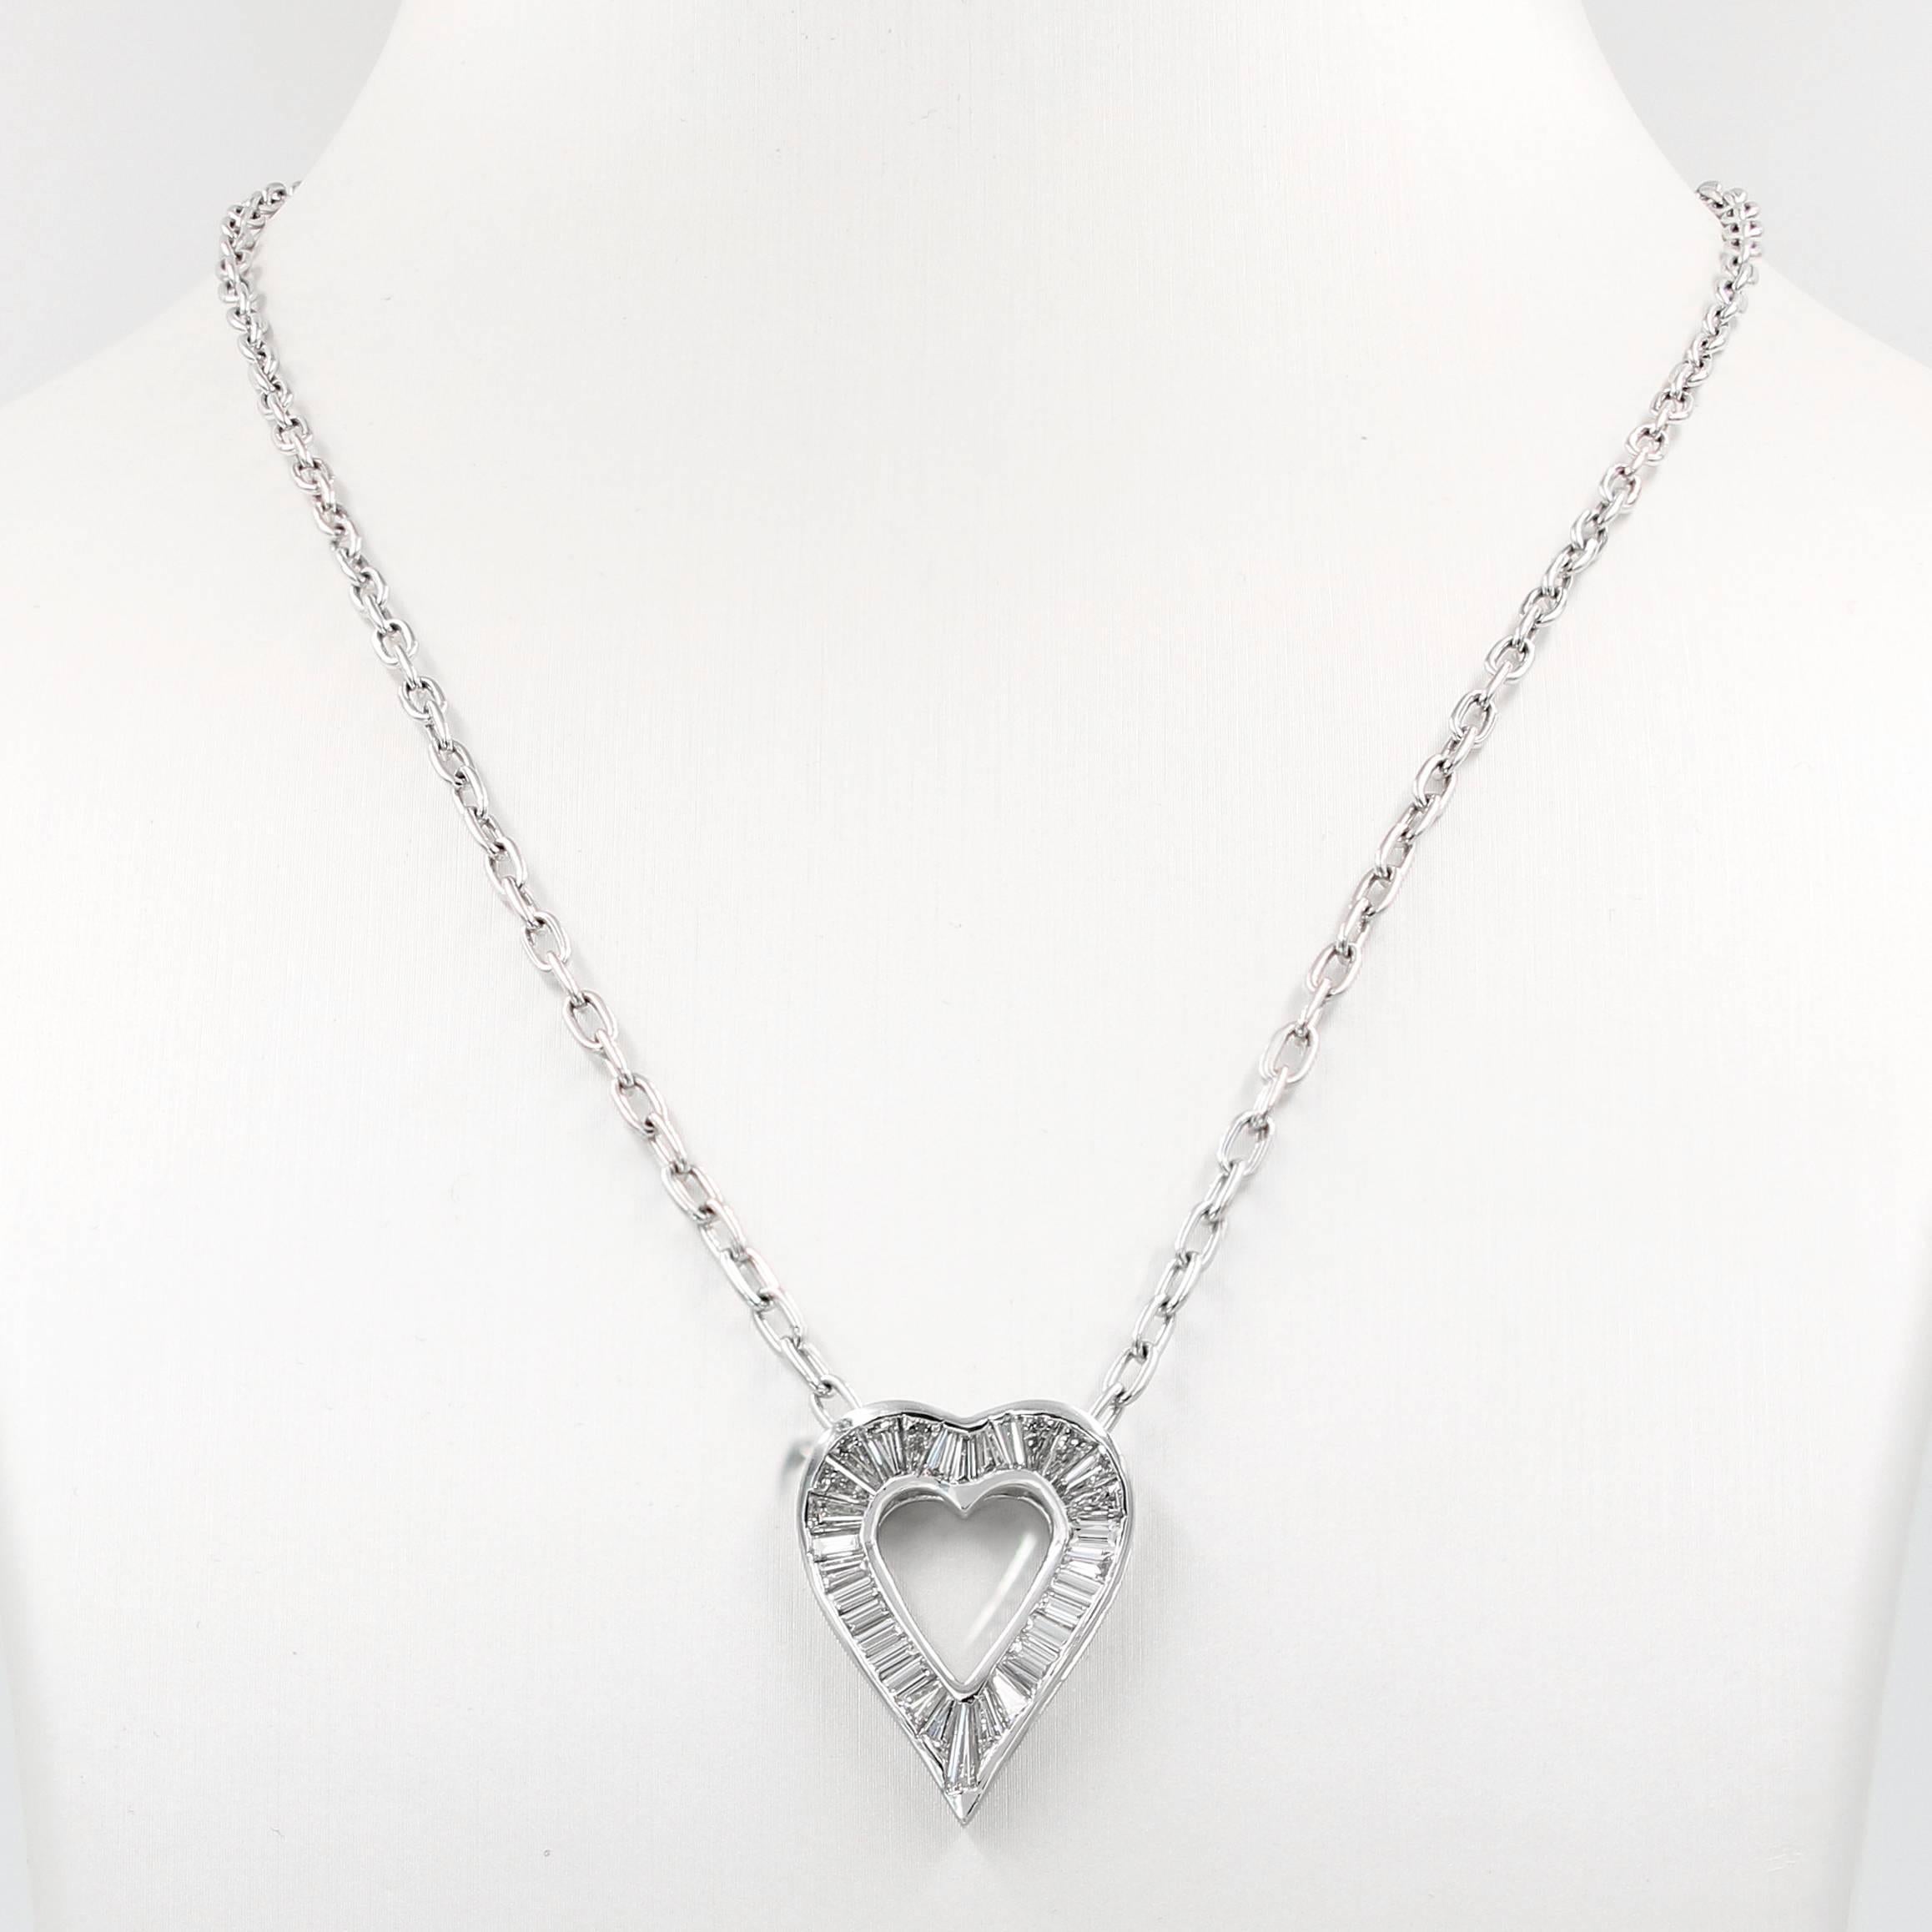 This elegant baguette diamond heart shape necklace in 18kt. white gold is a Lester Lampert original. It contains 32 baguettes = 2.40cts. t.w.  (the diamonds are G in color and VS clarity)

The piece is suspended from an 18kt. white gold oval link